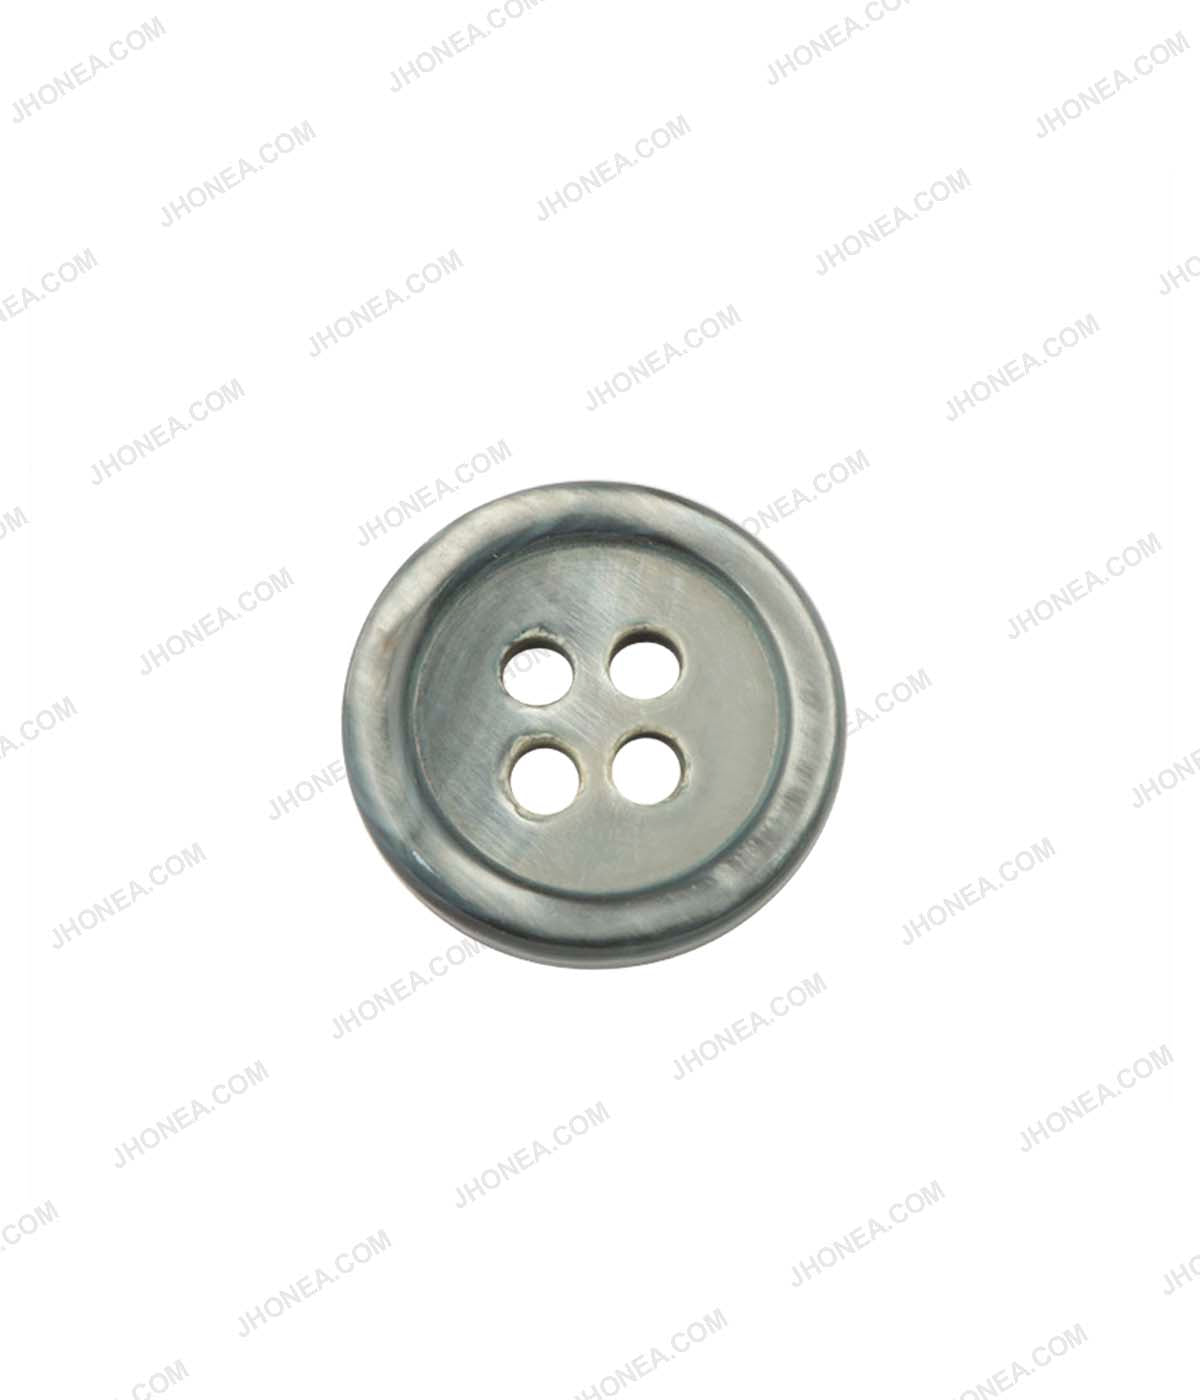 Glossy & Shiny Pearlescent Grey Rounded Rim Shirt Buttons